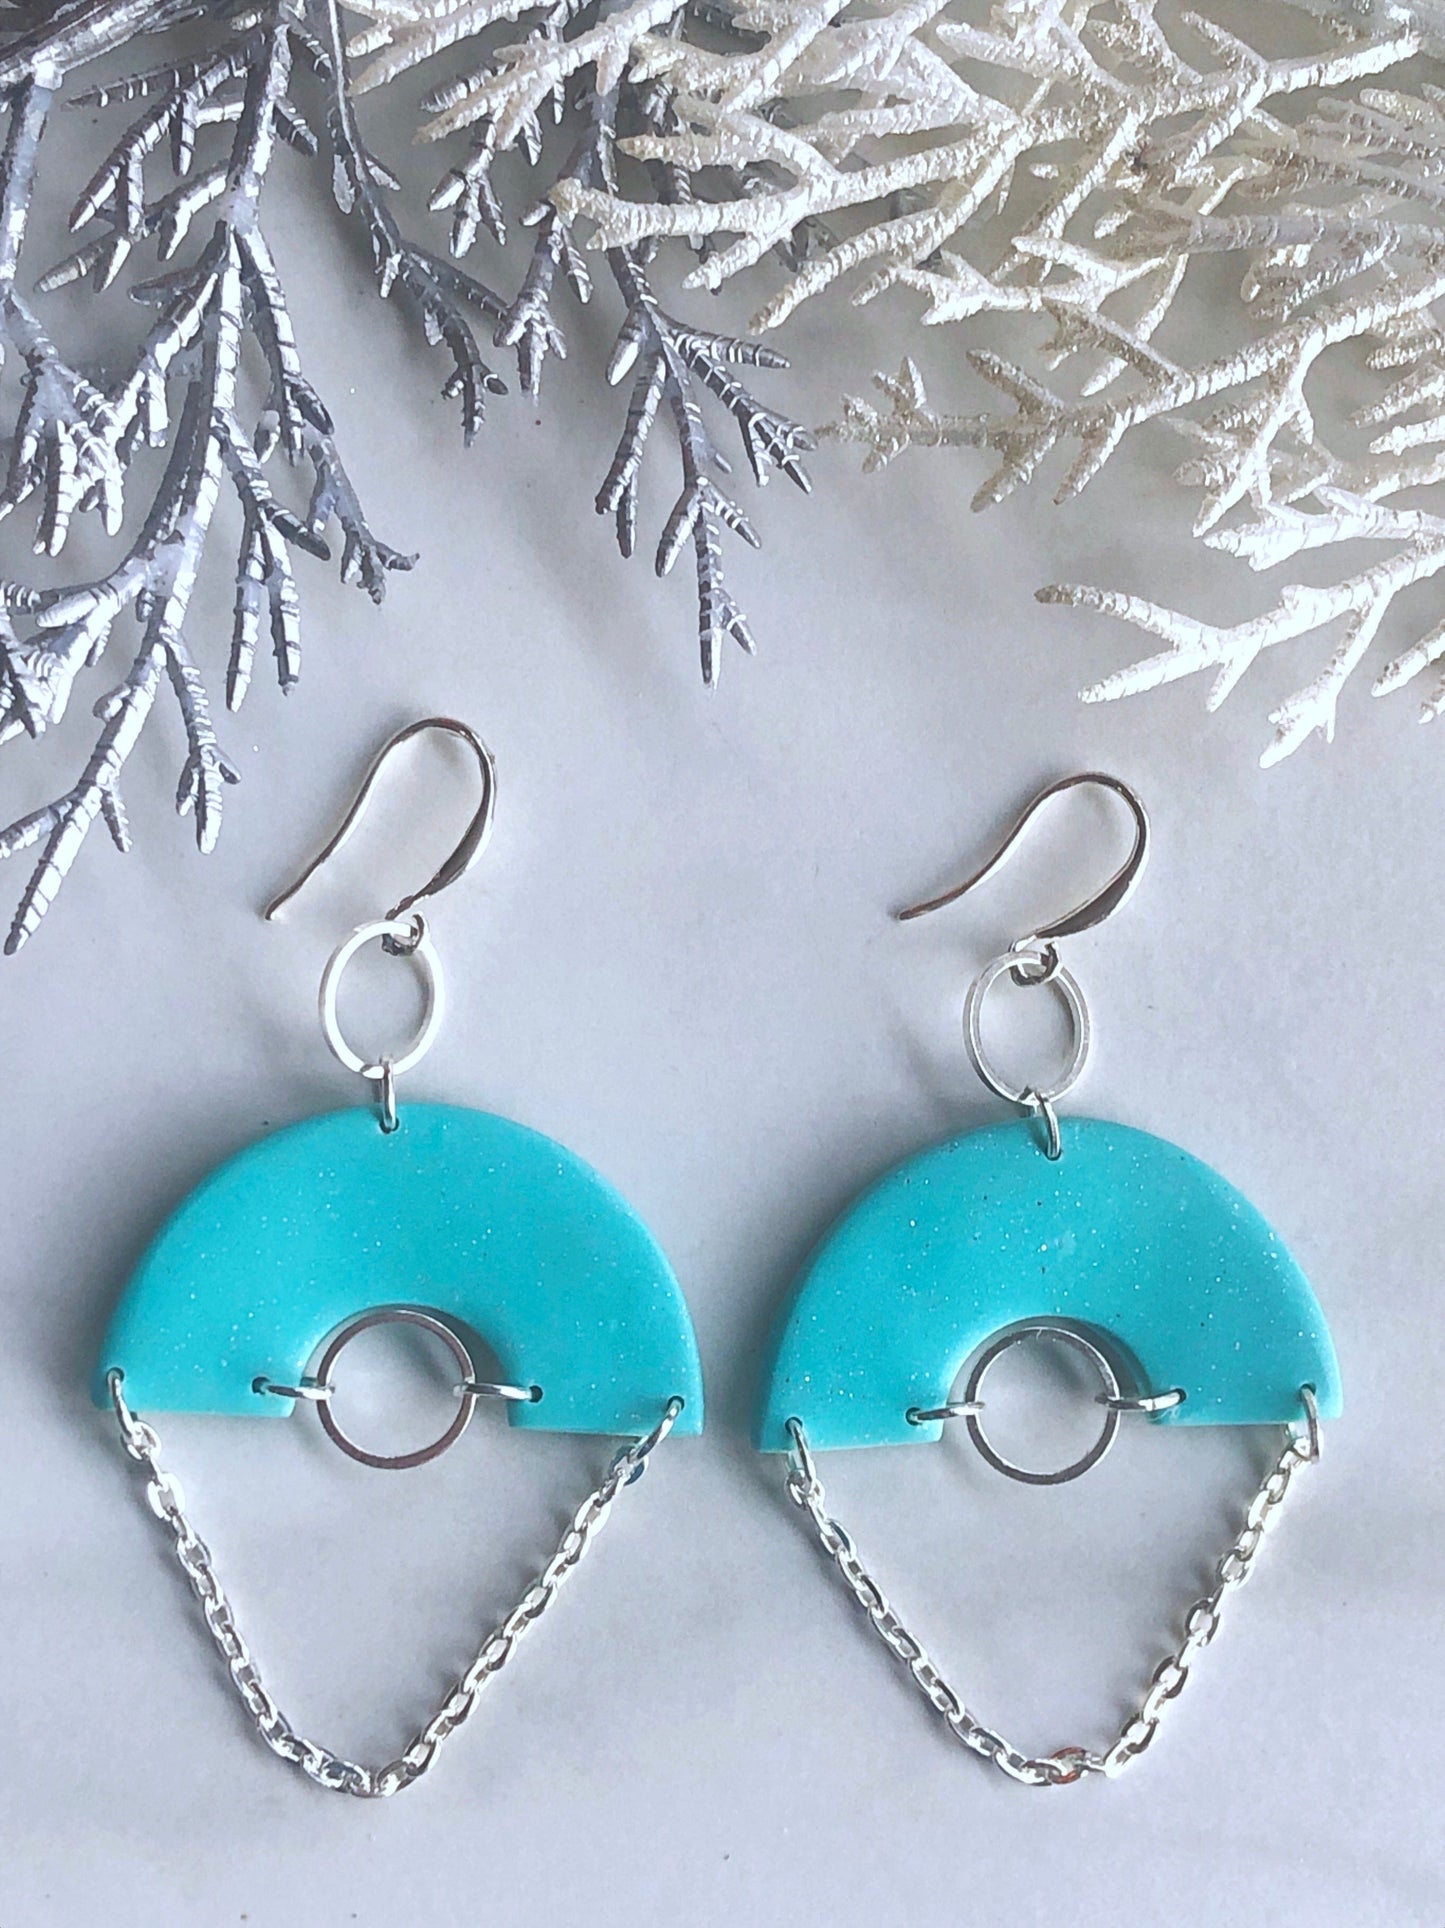 Earrings Aneira - Turquoise Clay Arch with Small Silver Circle Charm & Dangling Chain